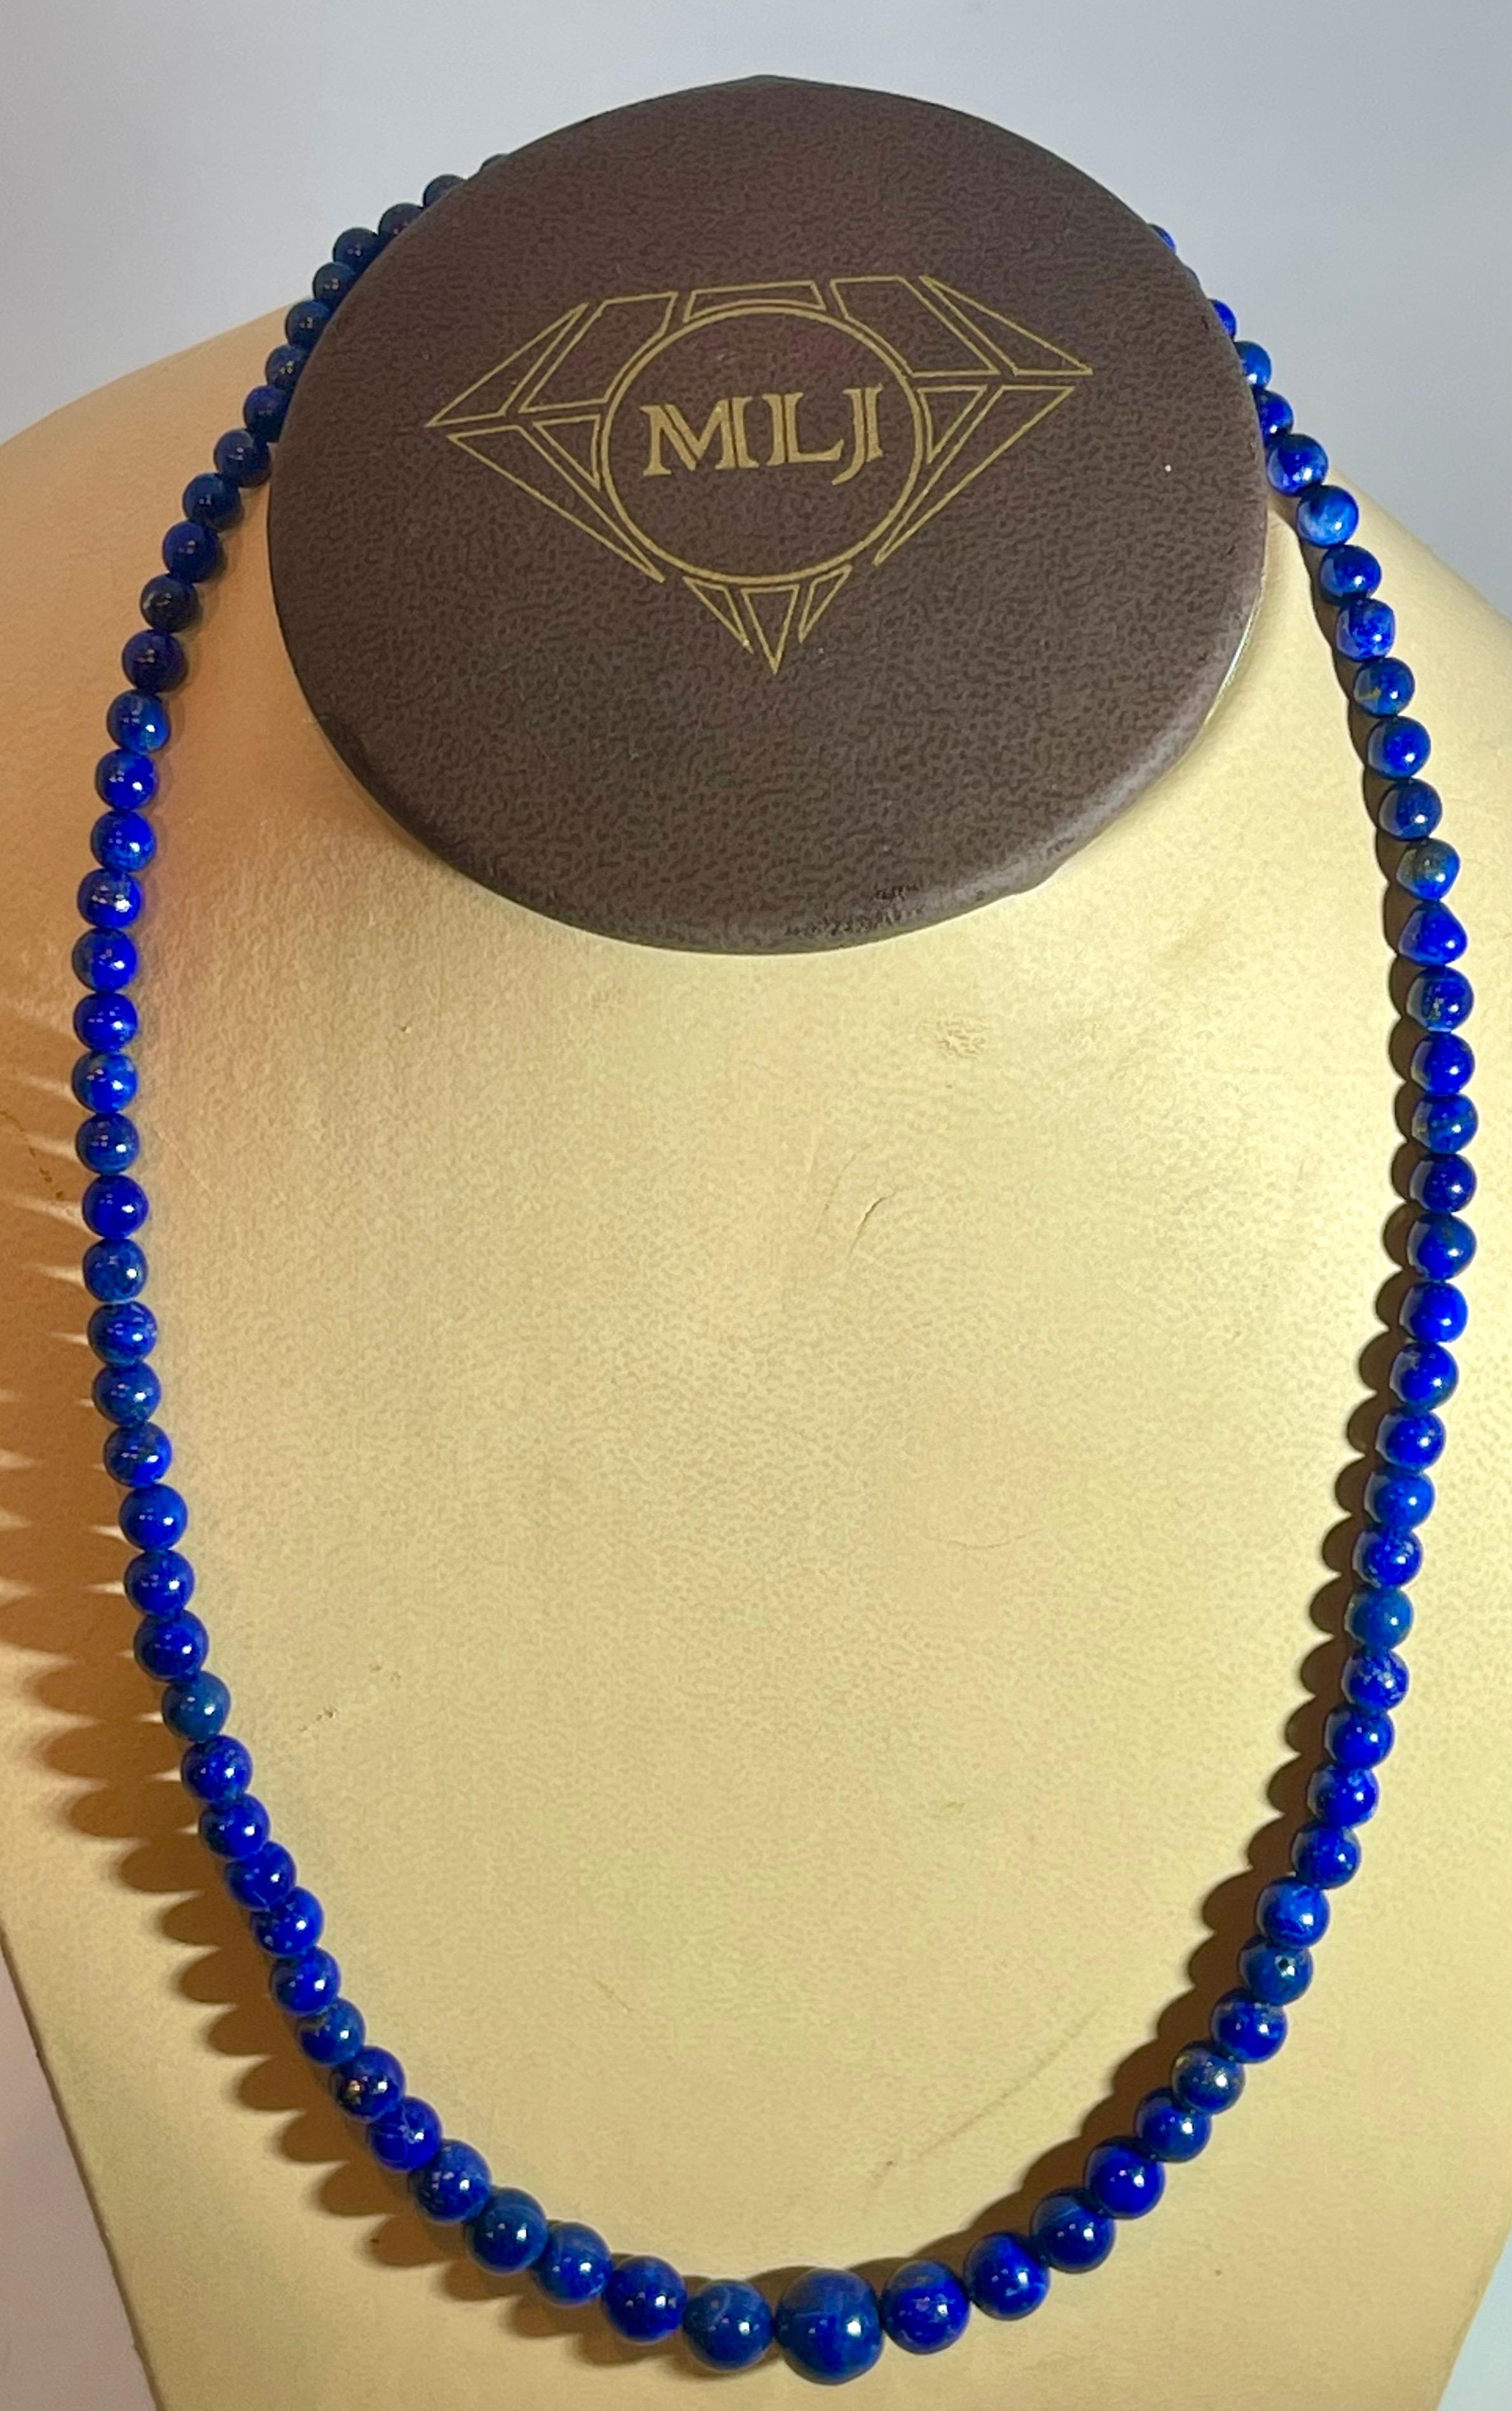 Vintage Lapis Lazuli Single Strand Necklace With 14 Karat Yellow Gold  heavy yellow gold Hook clasp 
This marvelous vintage Lapis Lazuli Graduating  necklace features 1 row of luscious  Beads
(measuring approximately  10.5 mm biggest bead and